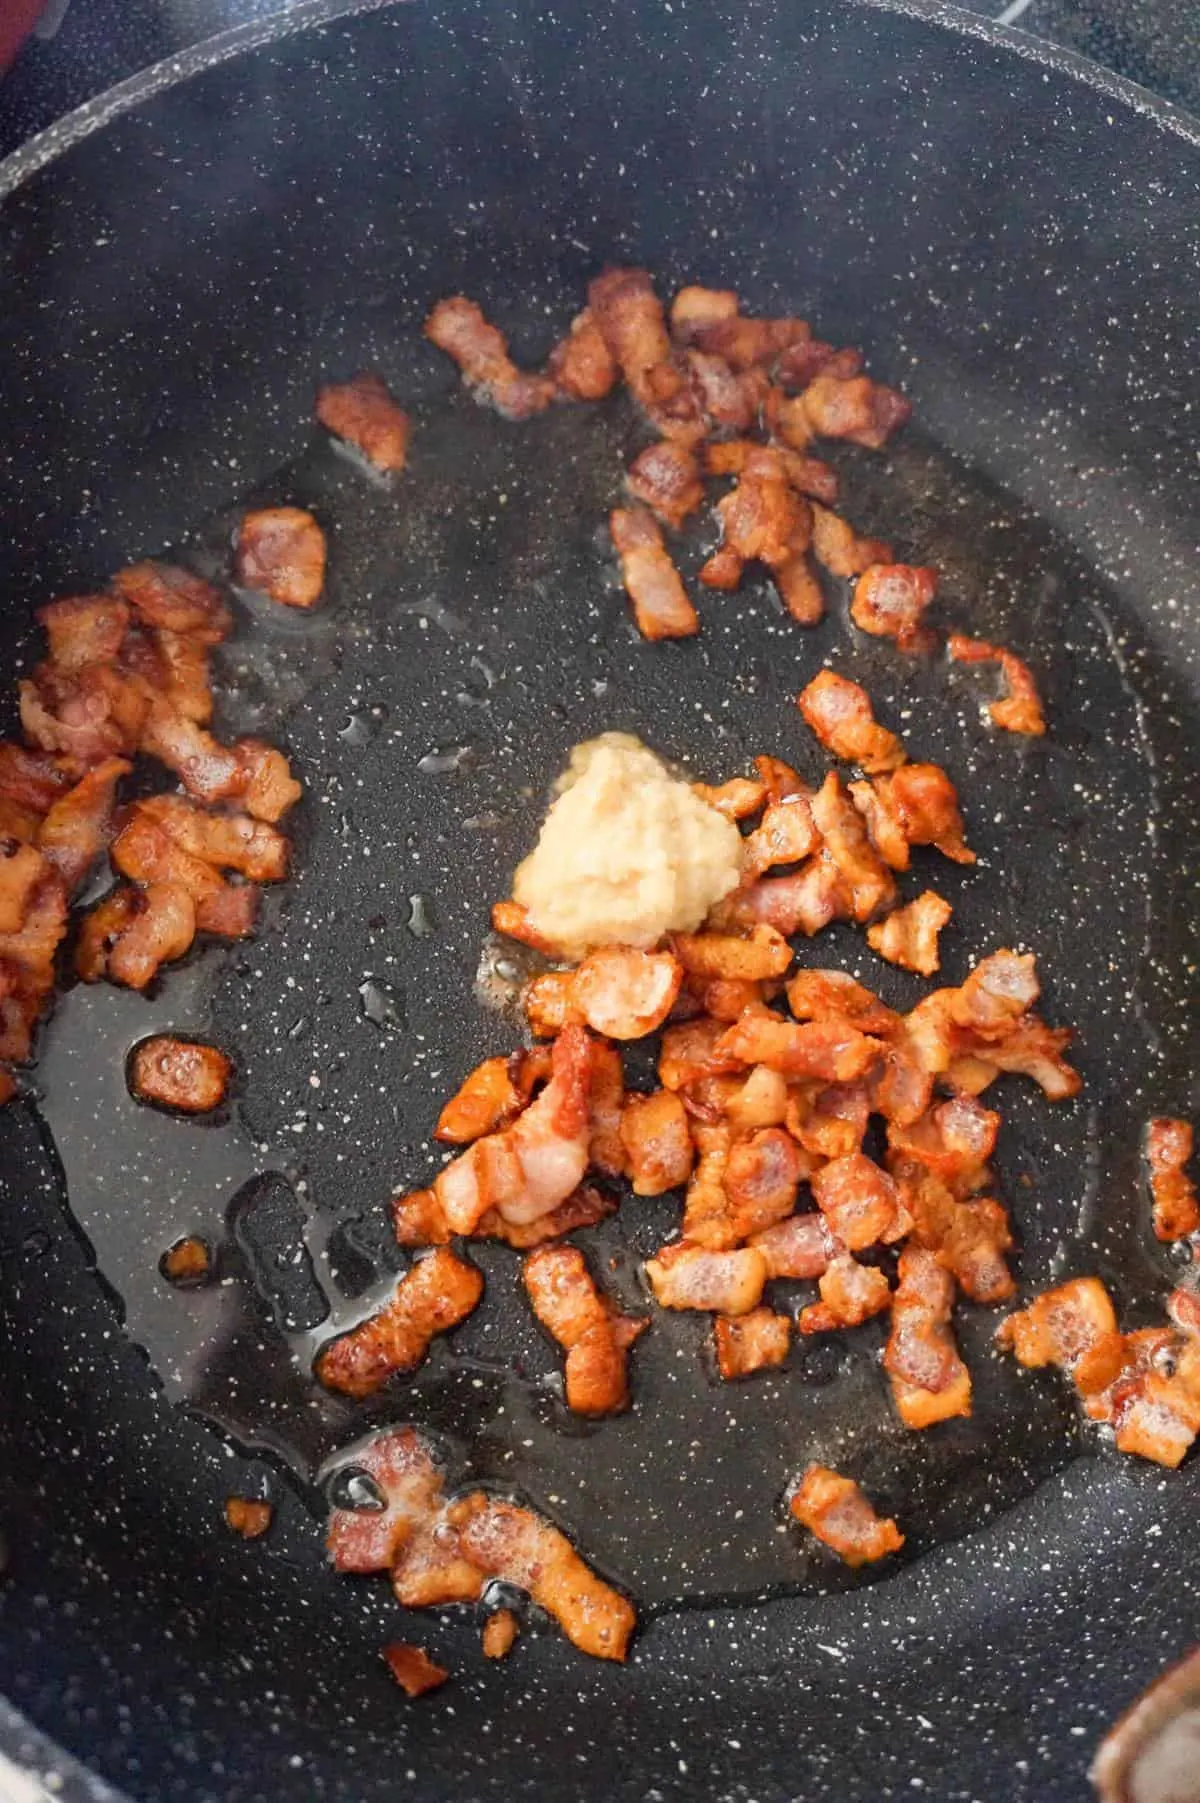 garlic puree added to pan with cooked bacon pieces